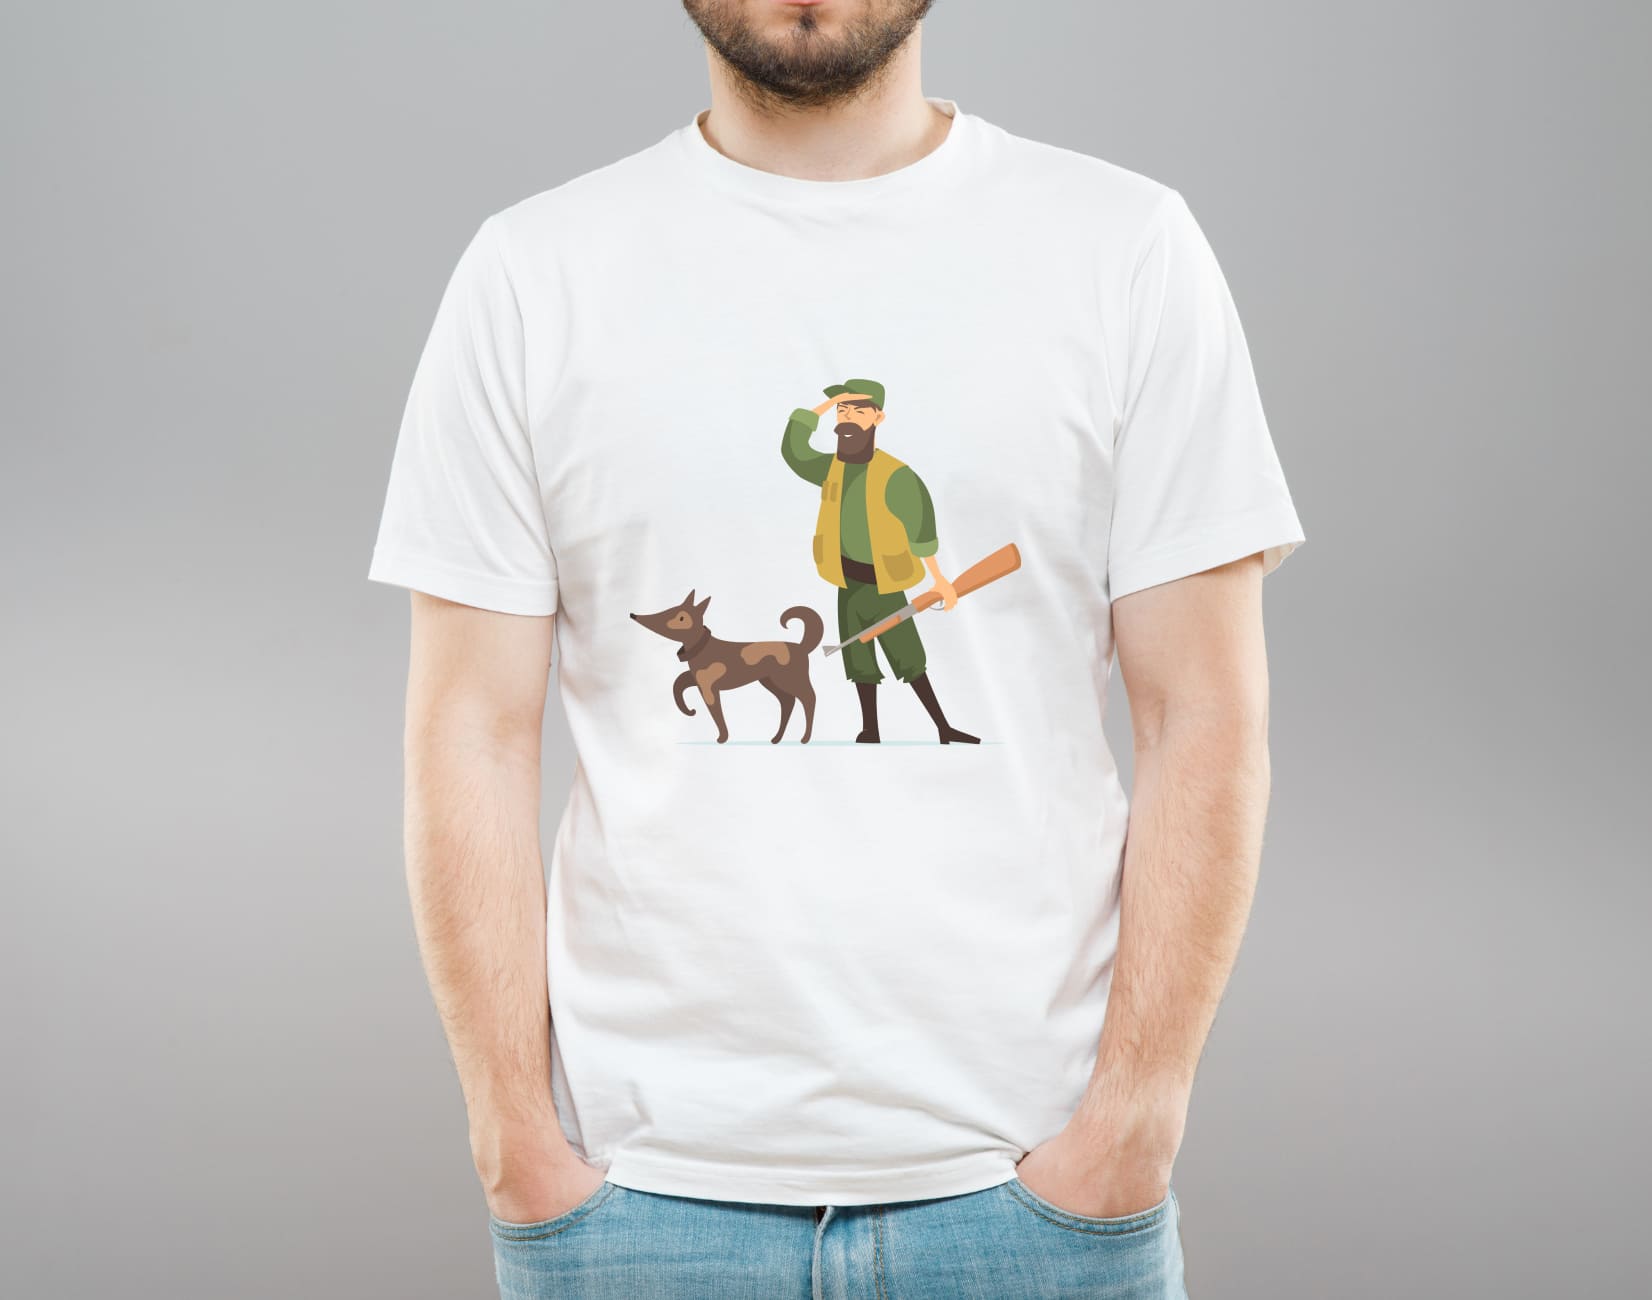 Image of a white t-shirt with a beautiful print of a duck hunter with a dog.